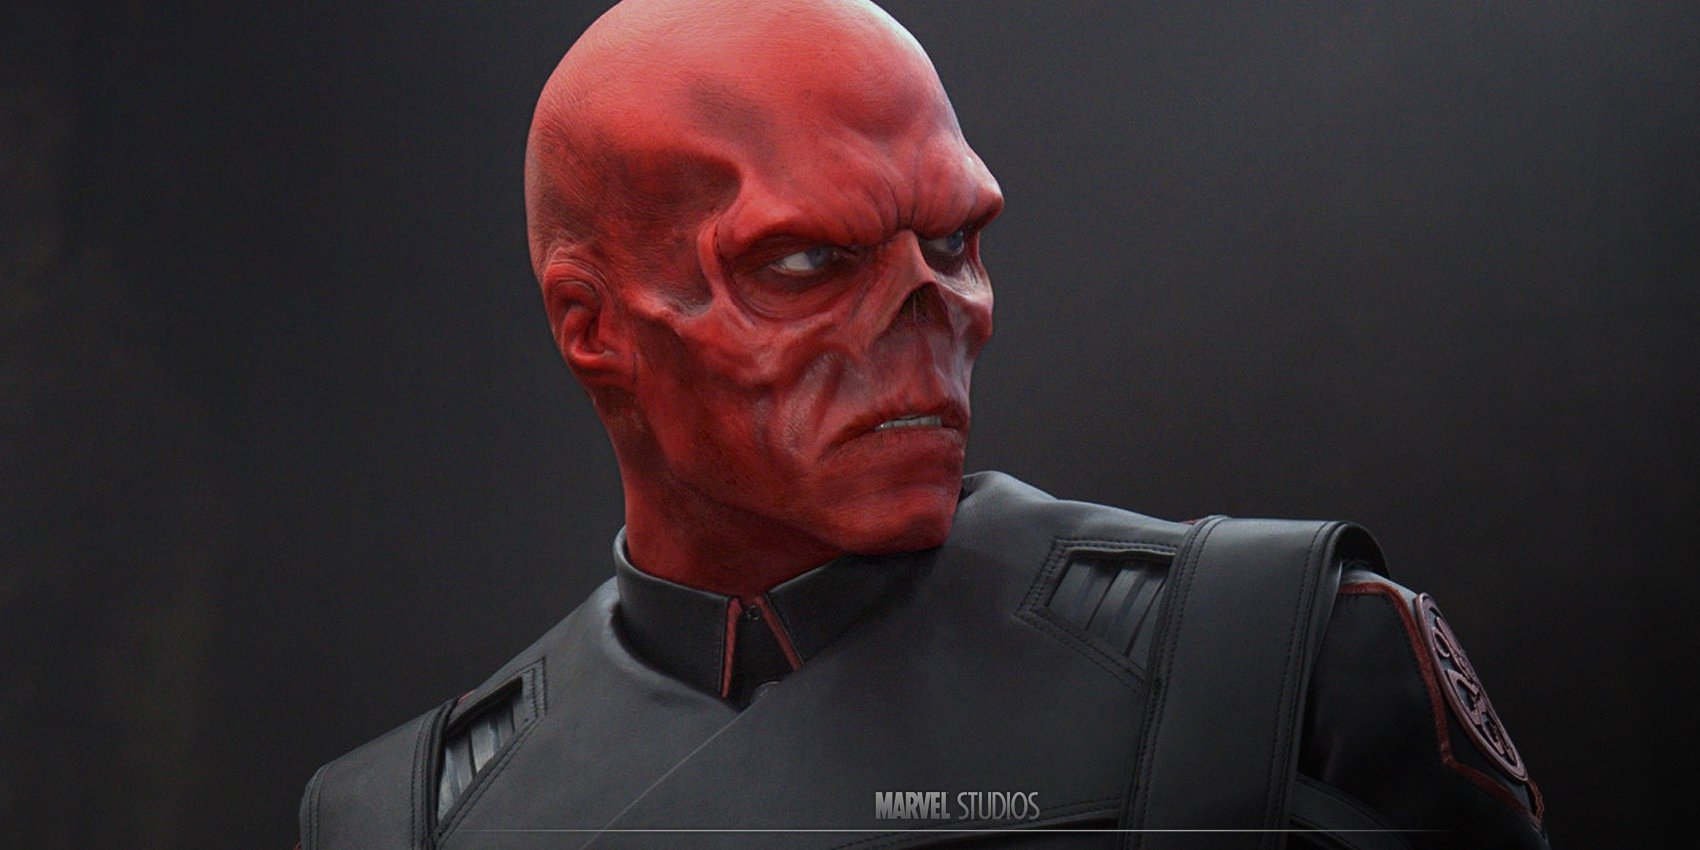 11. Rage of the Red Skull